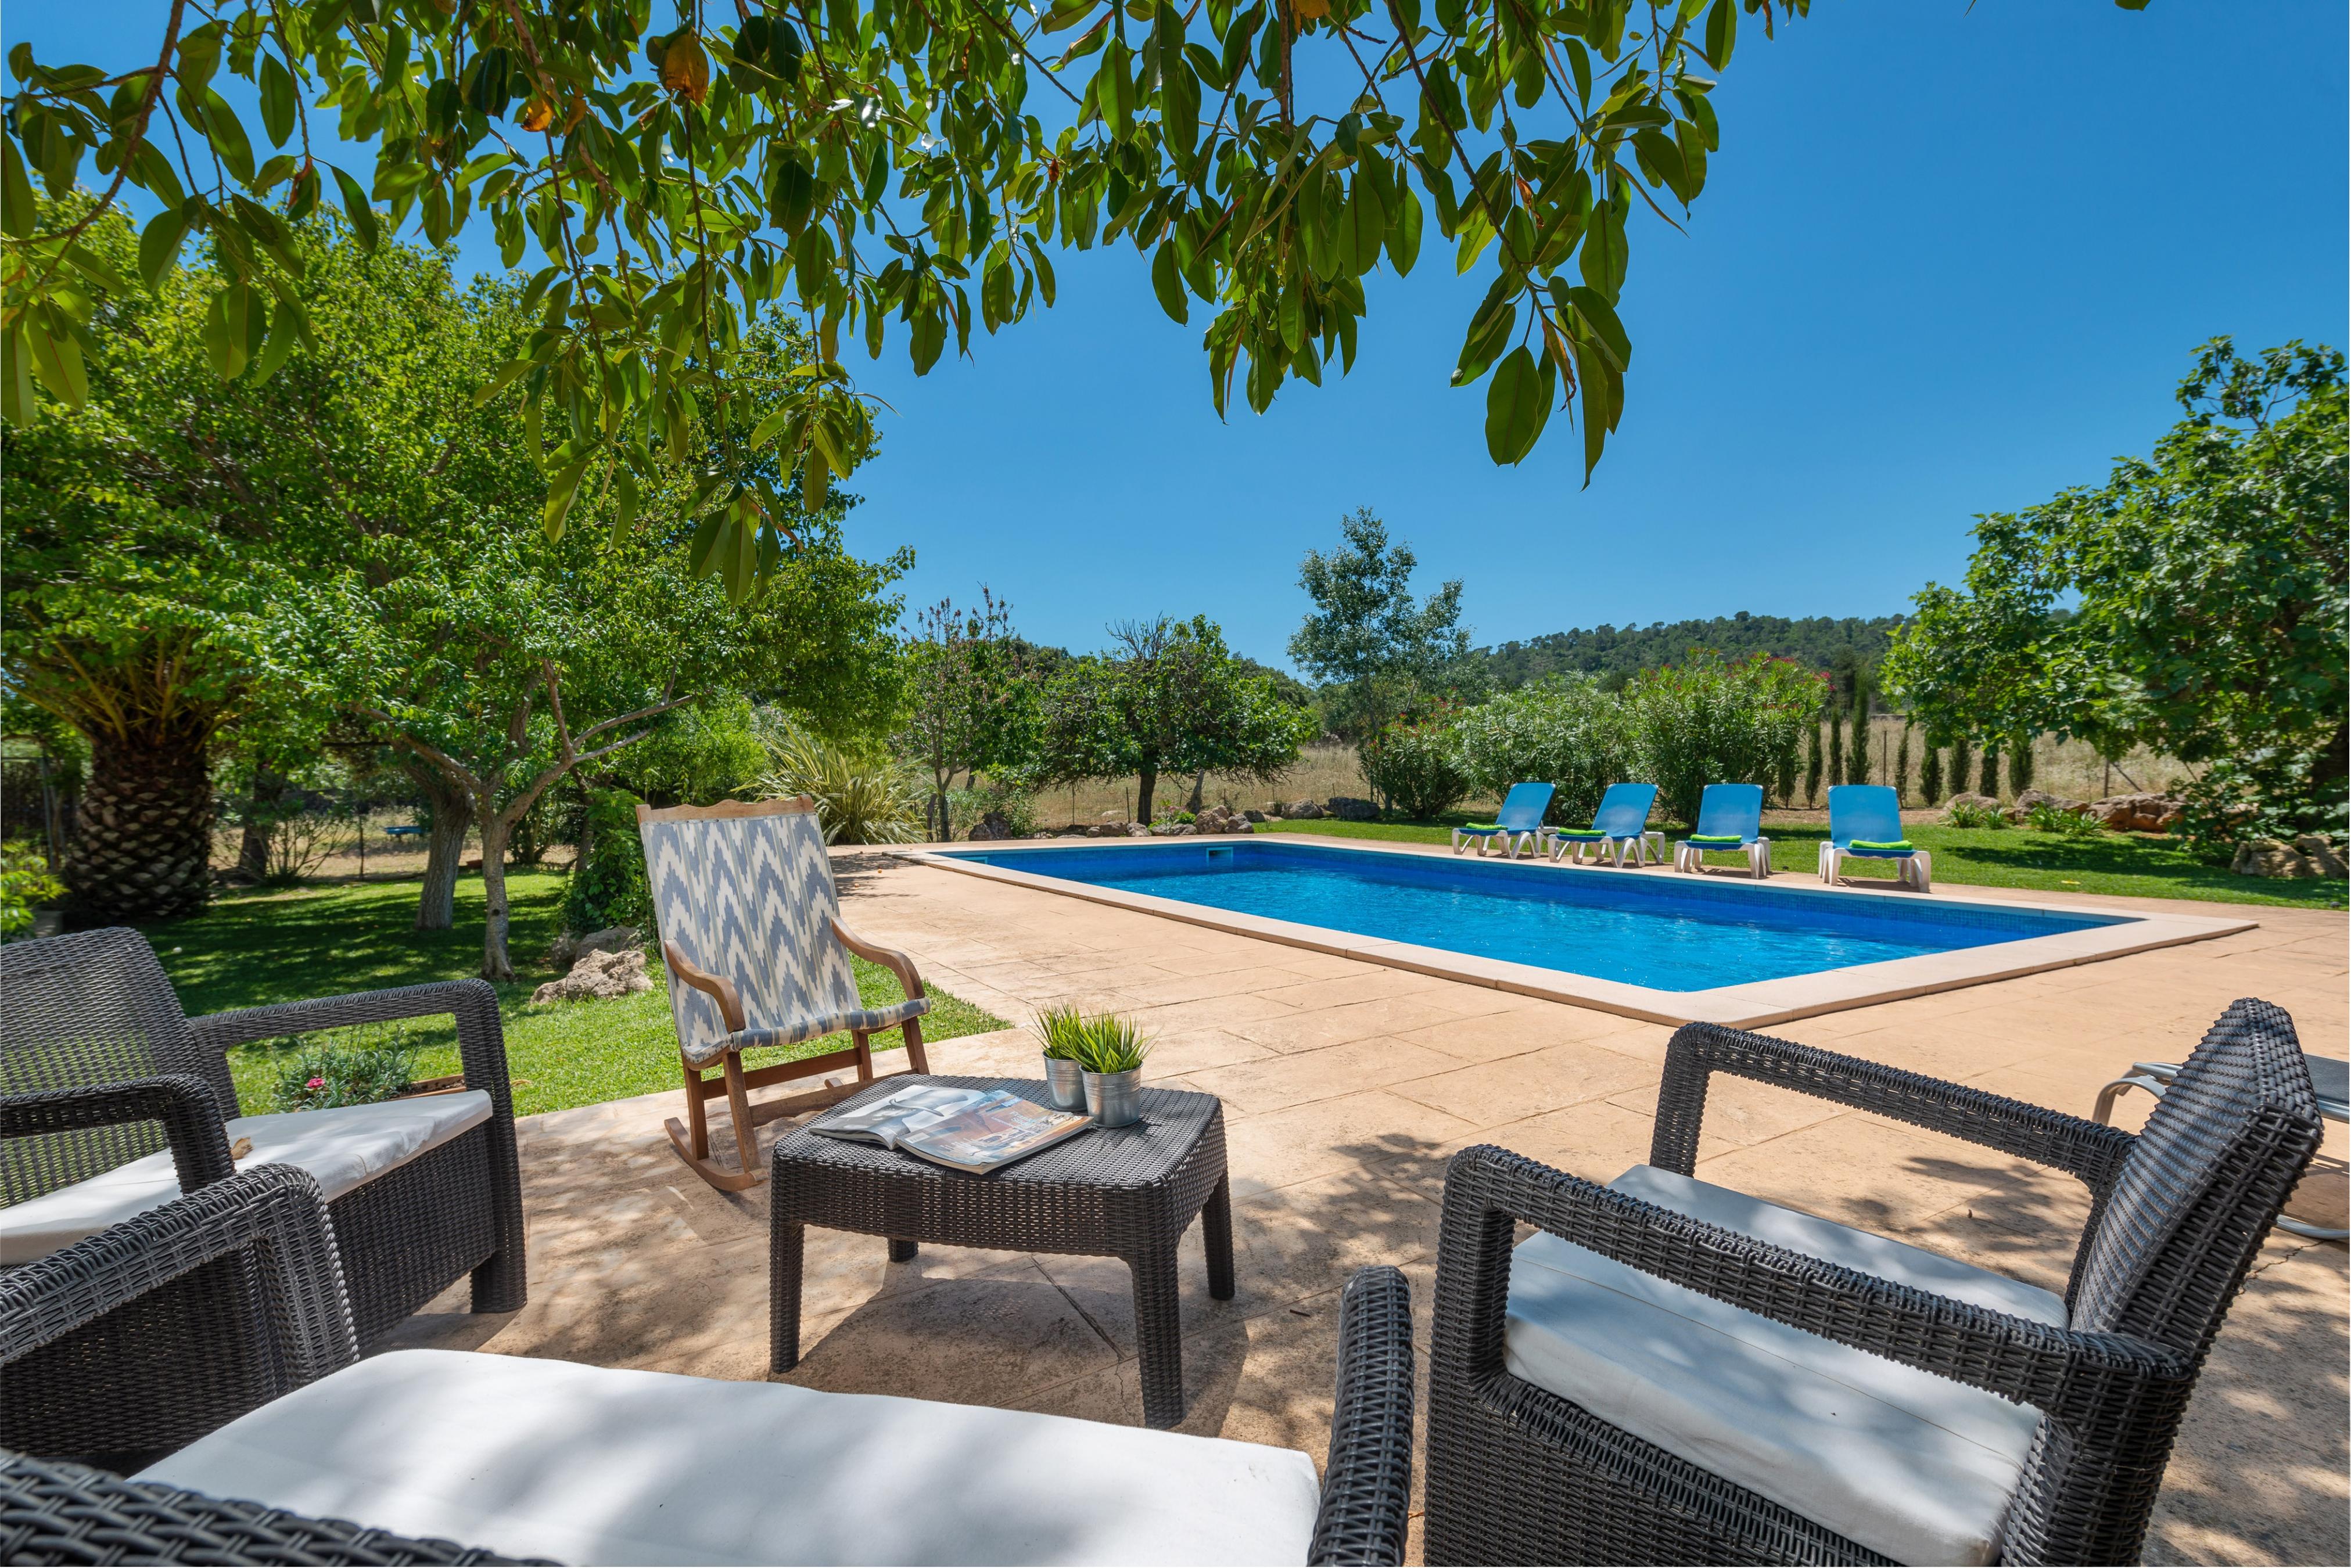 Property Image 2 - CAN SUA - Beautiful rustic finca with private pool, located a few km from the beach Free WiFi